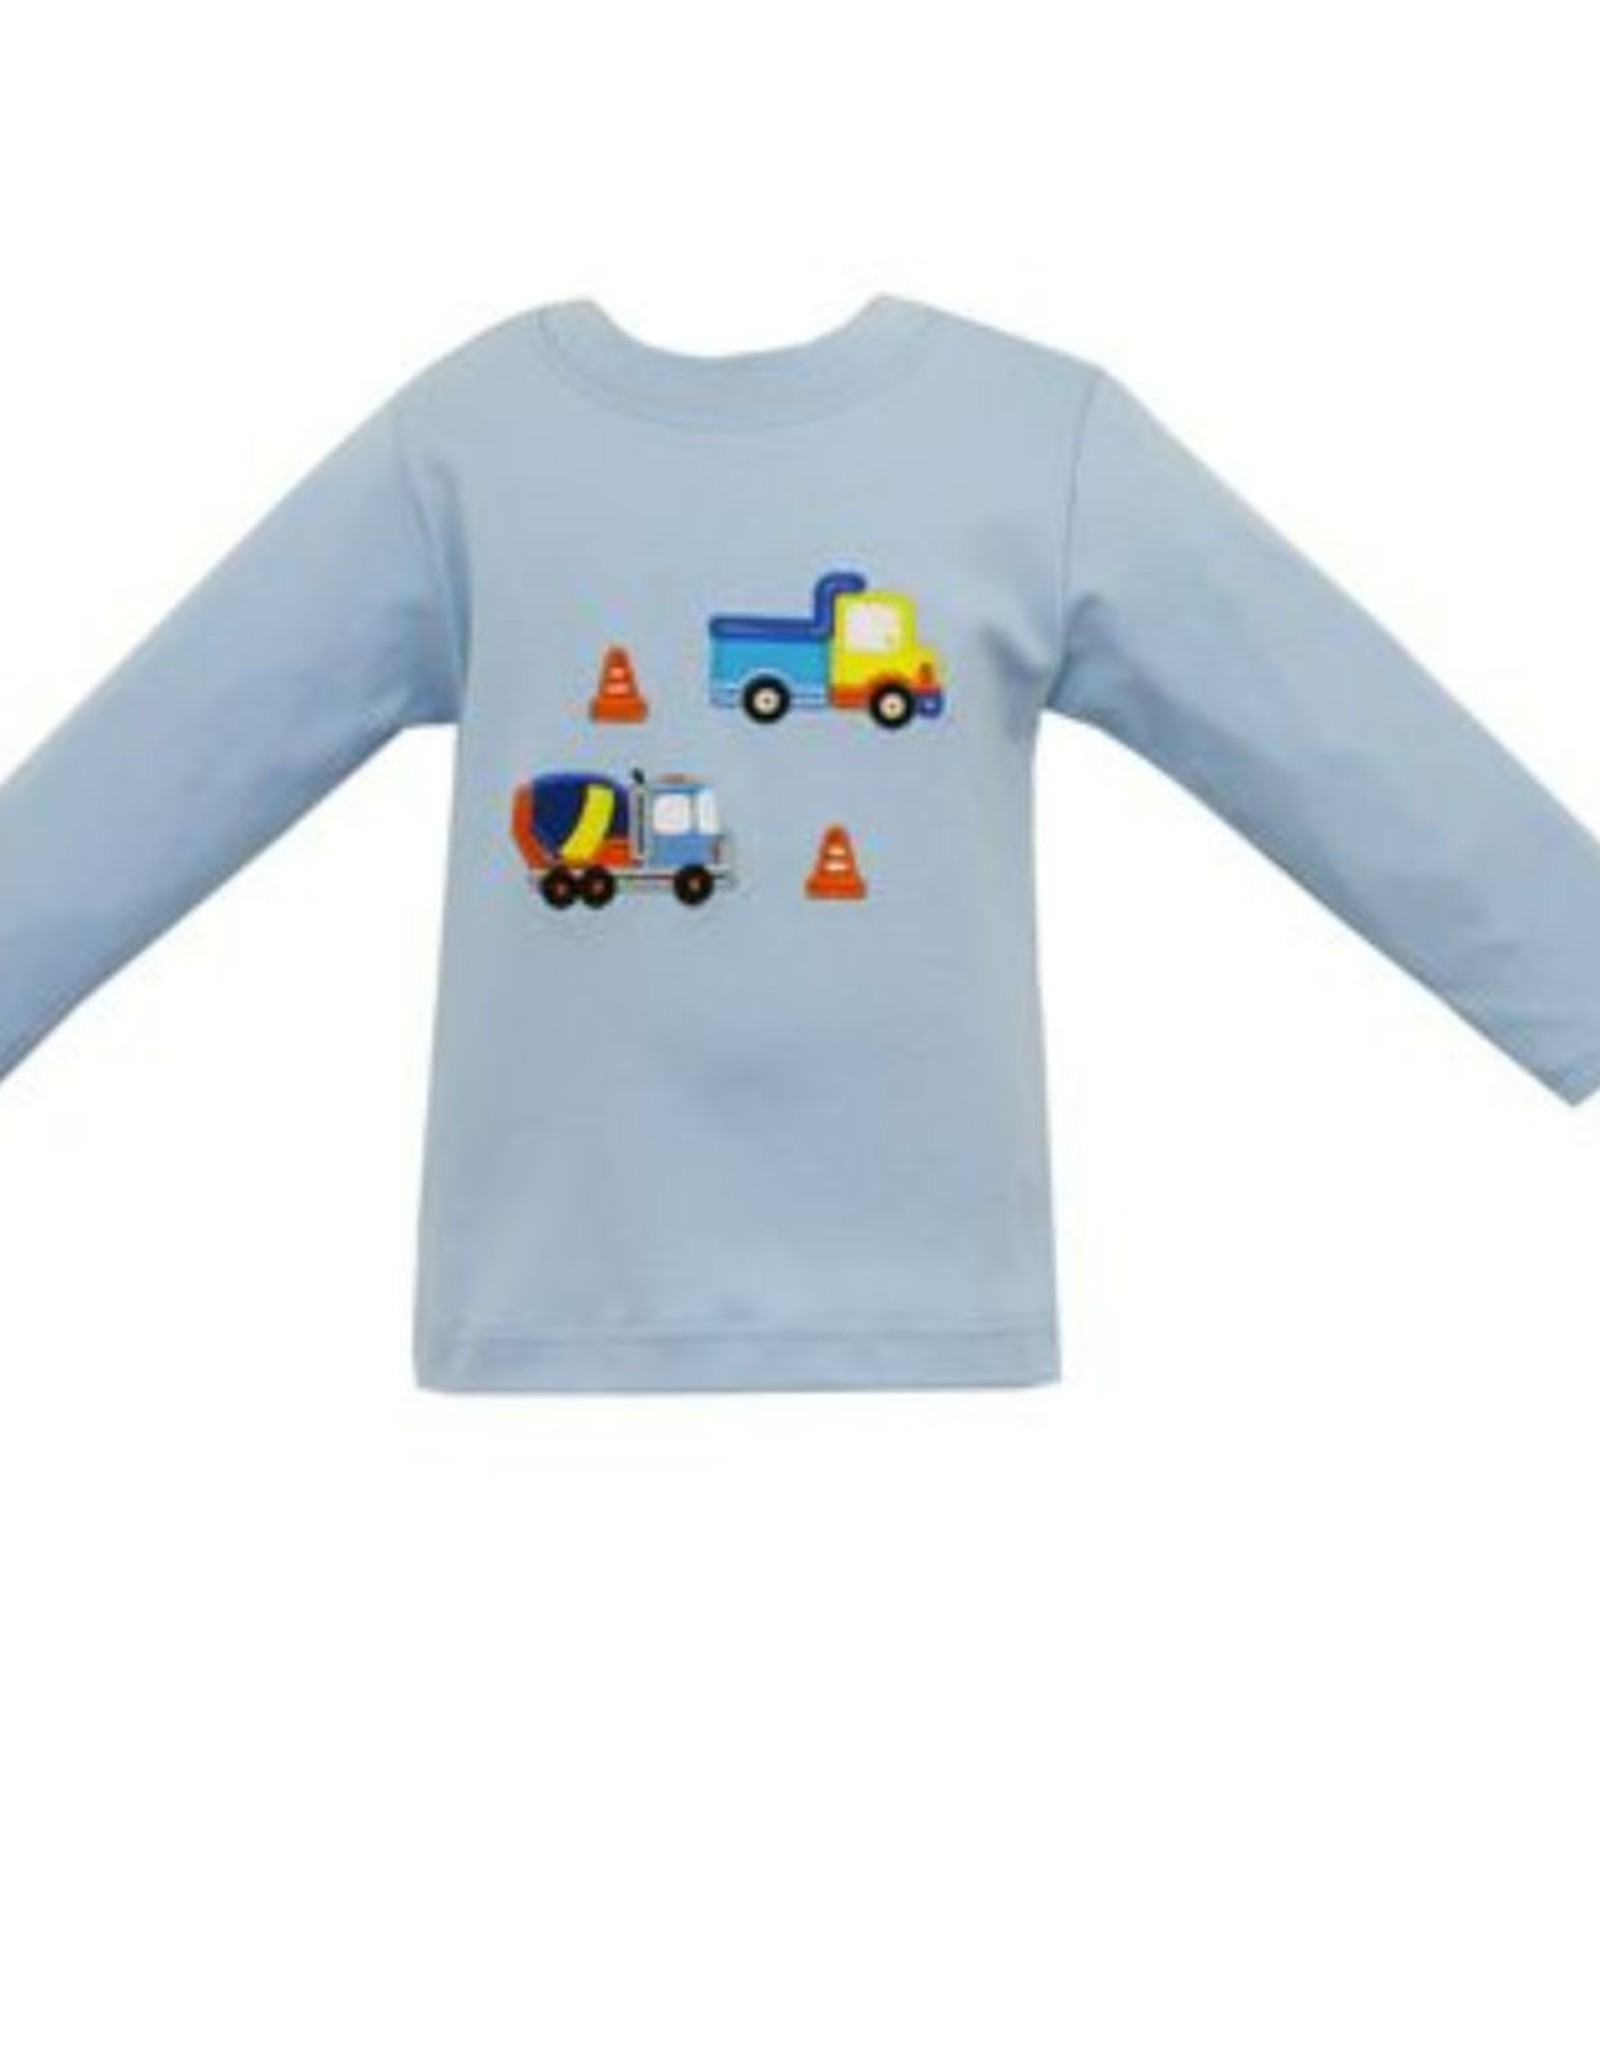 Claire and Charlie Trucks  Blue Knit Boy's T-Shirt - L/S